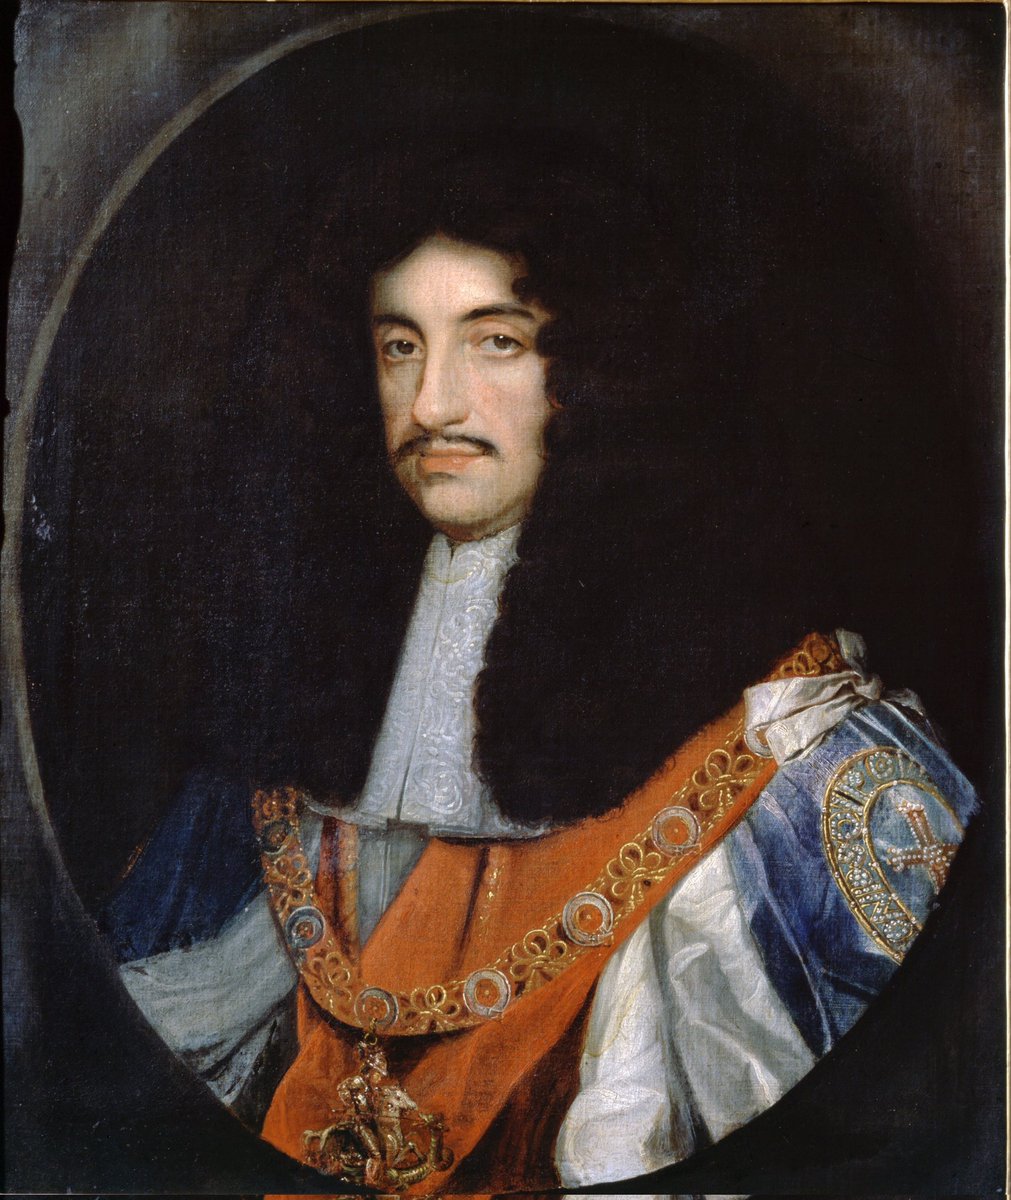 #onthisday 29 May 1630 King Charles II was born Charles was born in St James's Palace on 29 May 1630. His parents were Charles I, who ruled the three kingdoms of England, Scotland, and Ireland, and Henrietta Maria, the sister of the French king Louis XIII. Charles was their